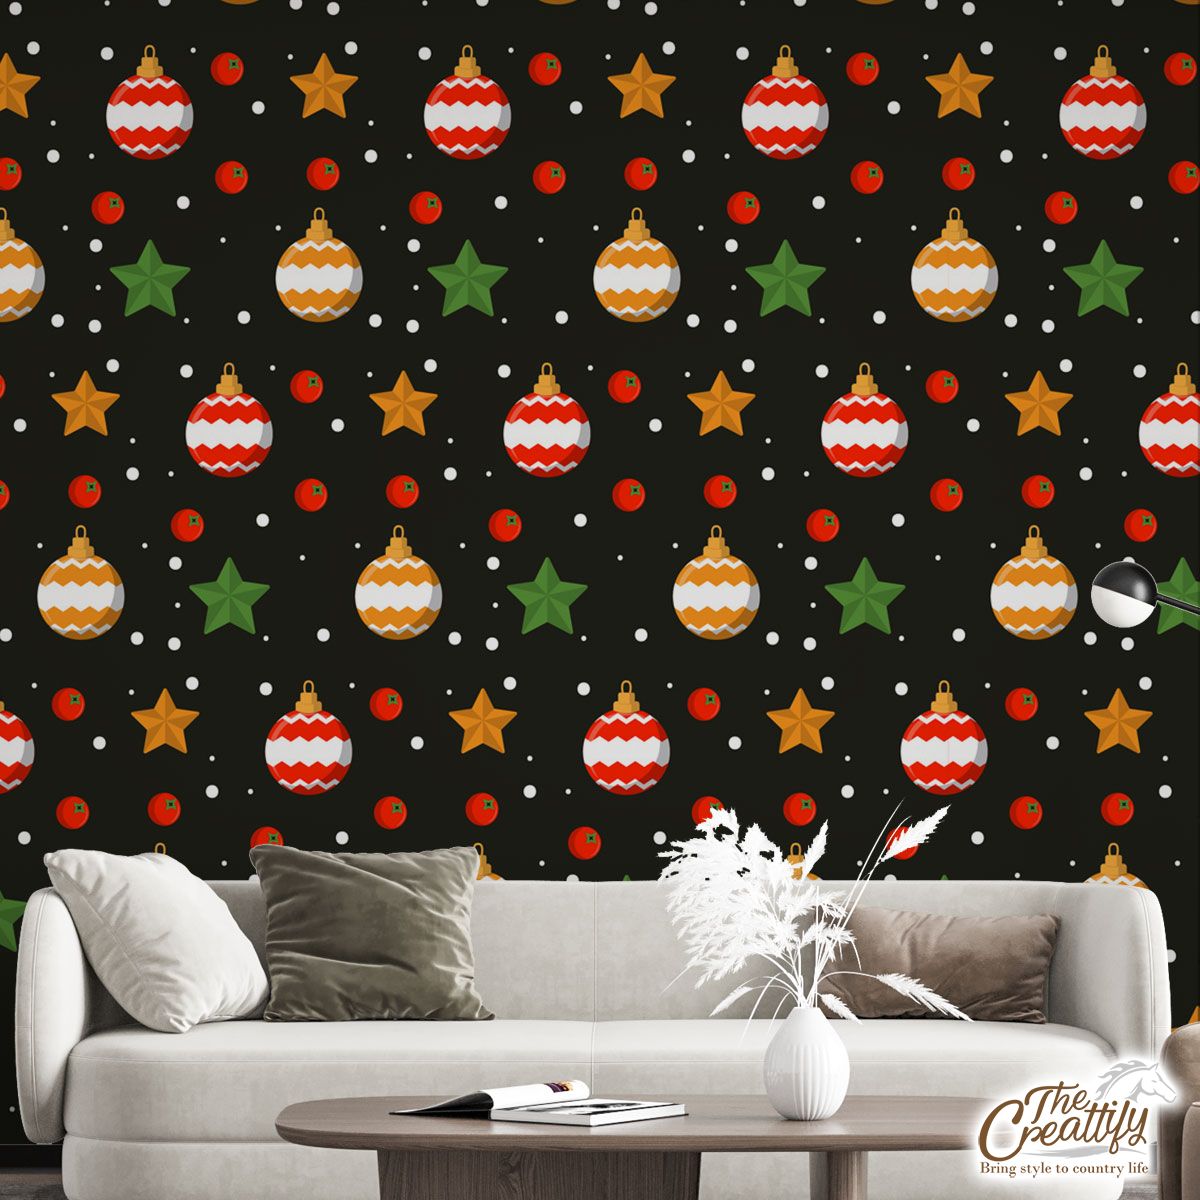 Christmas Star And Baubles Seamless Pattern Wall Mural